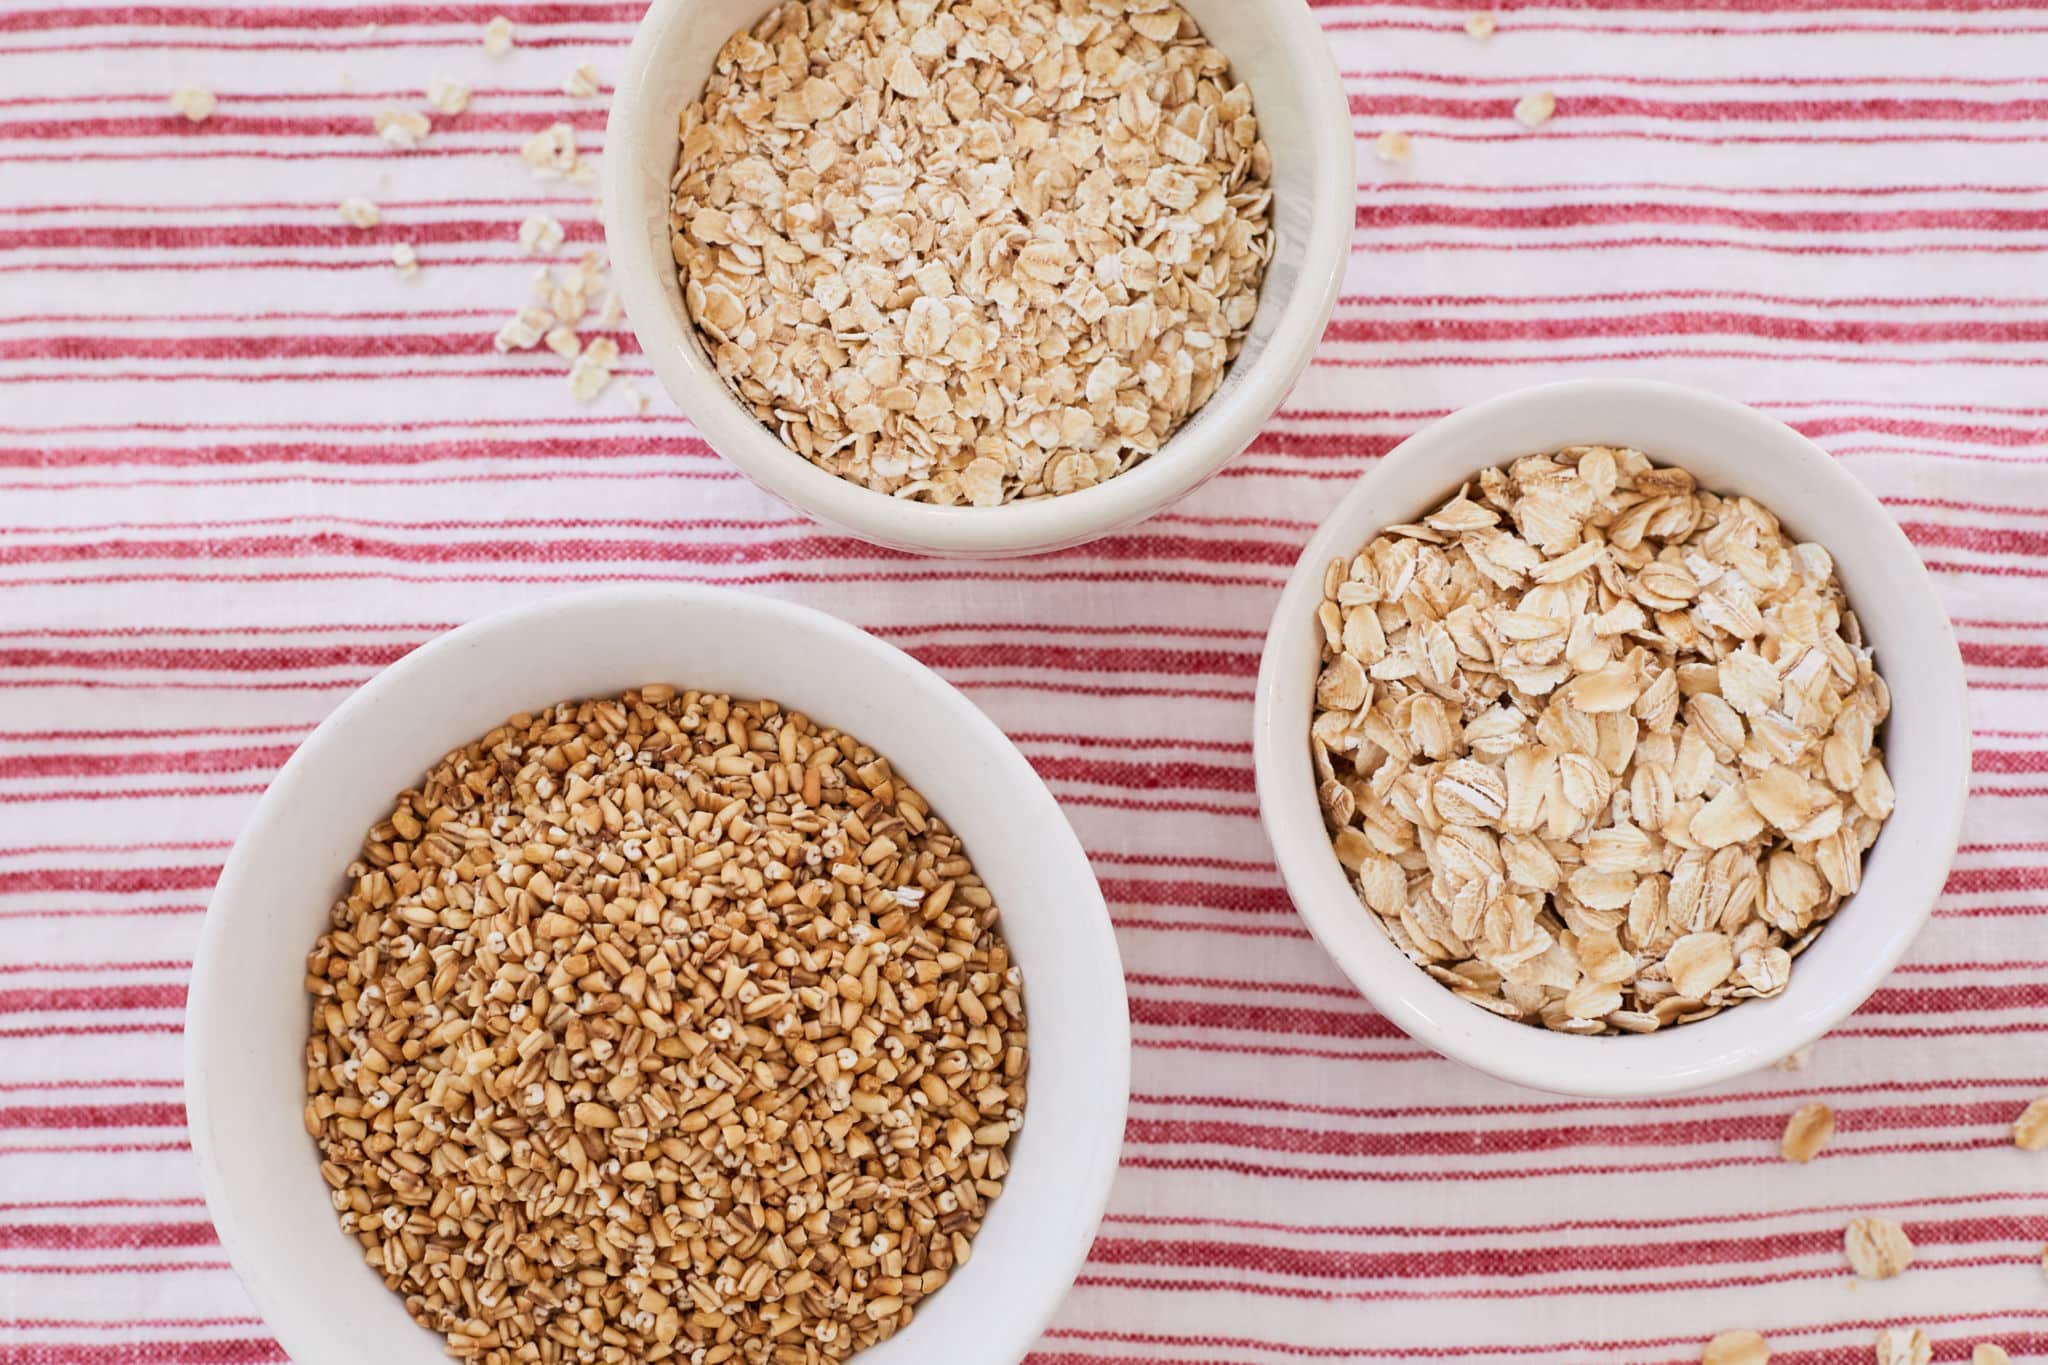 Three different types of oats are displayed in white bowls. At the top is the finest of the three, instant oats, to its right, in the middle, are old fashioned oats, and to the bottom left are oat grains.